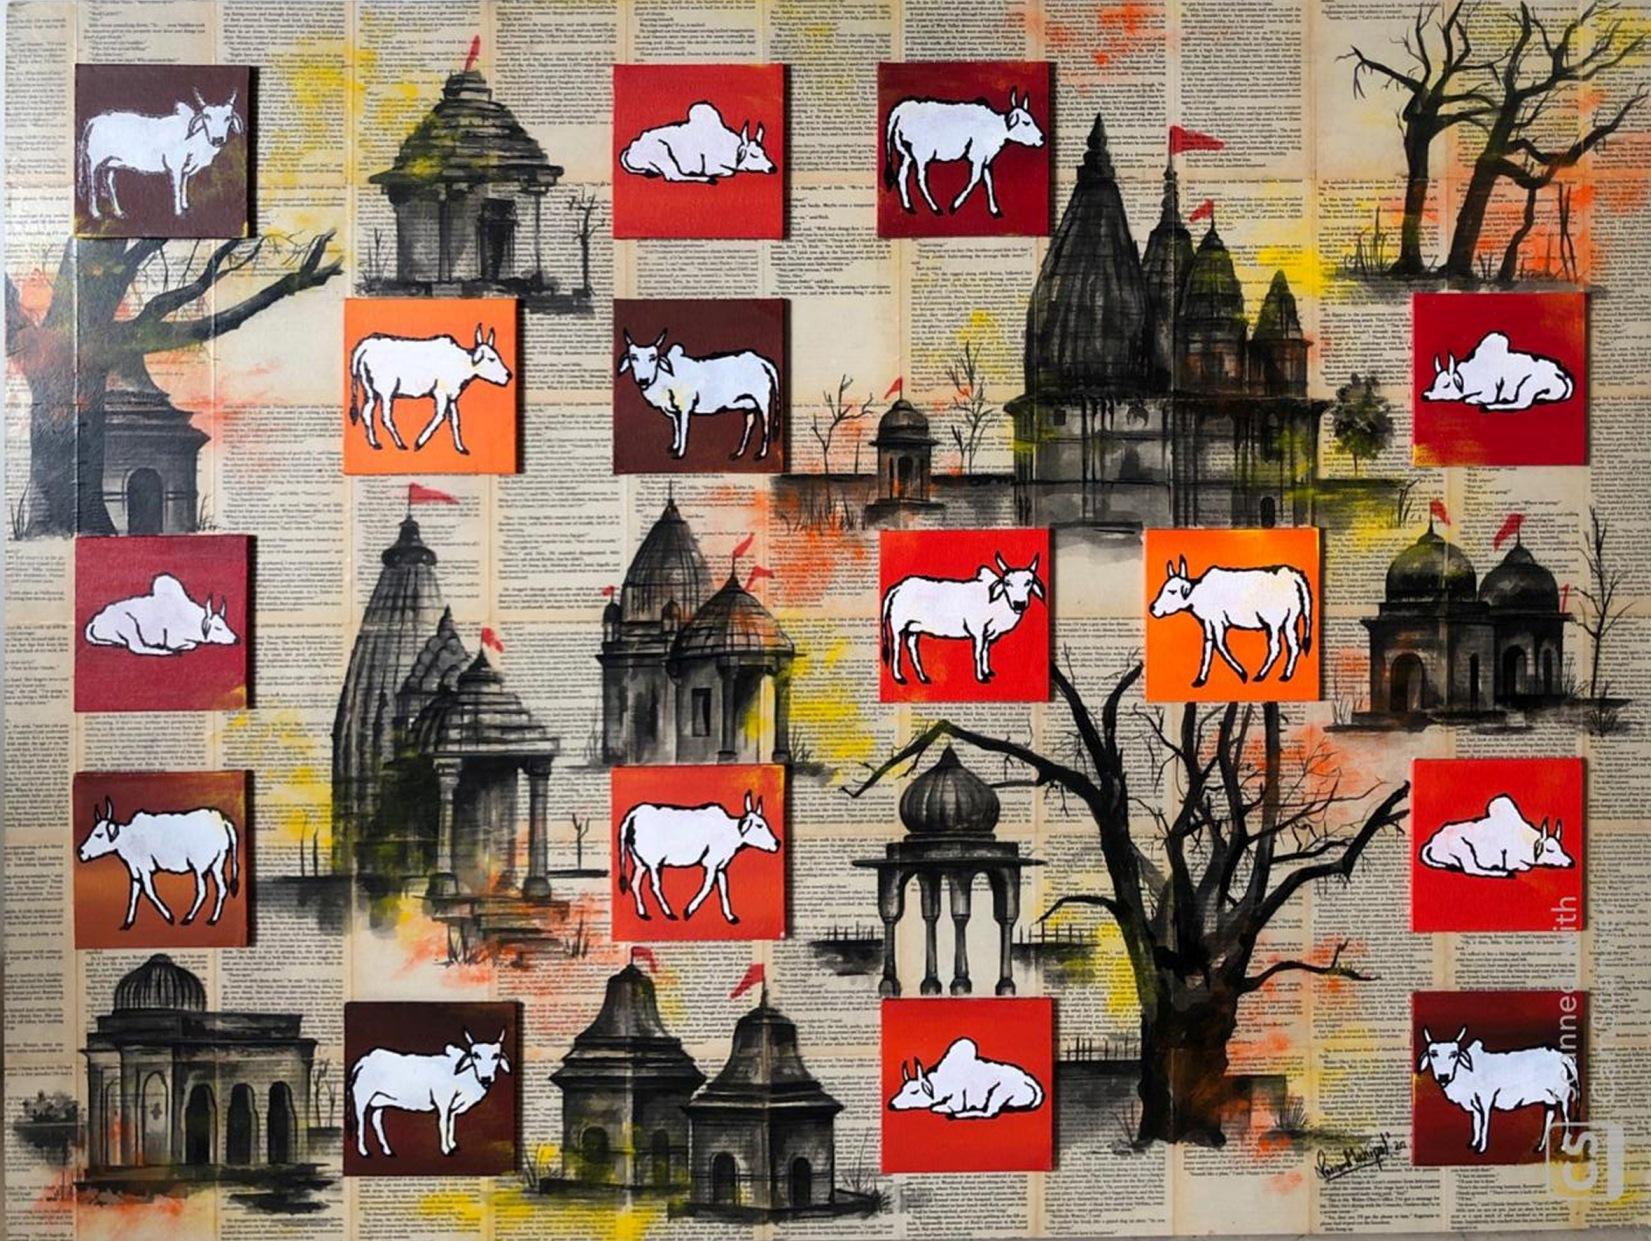 Untitled Mixed Media Ink & Acrylic on Canvas on Wood by Indian Artist "In Stock"